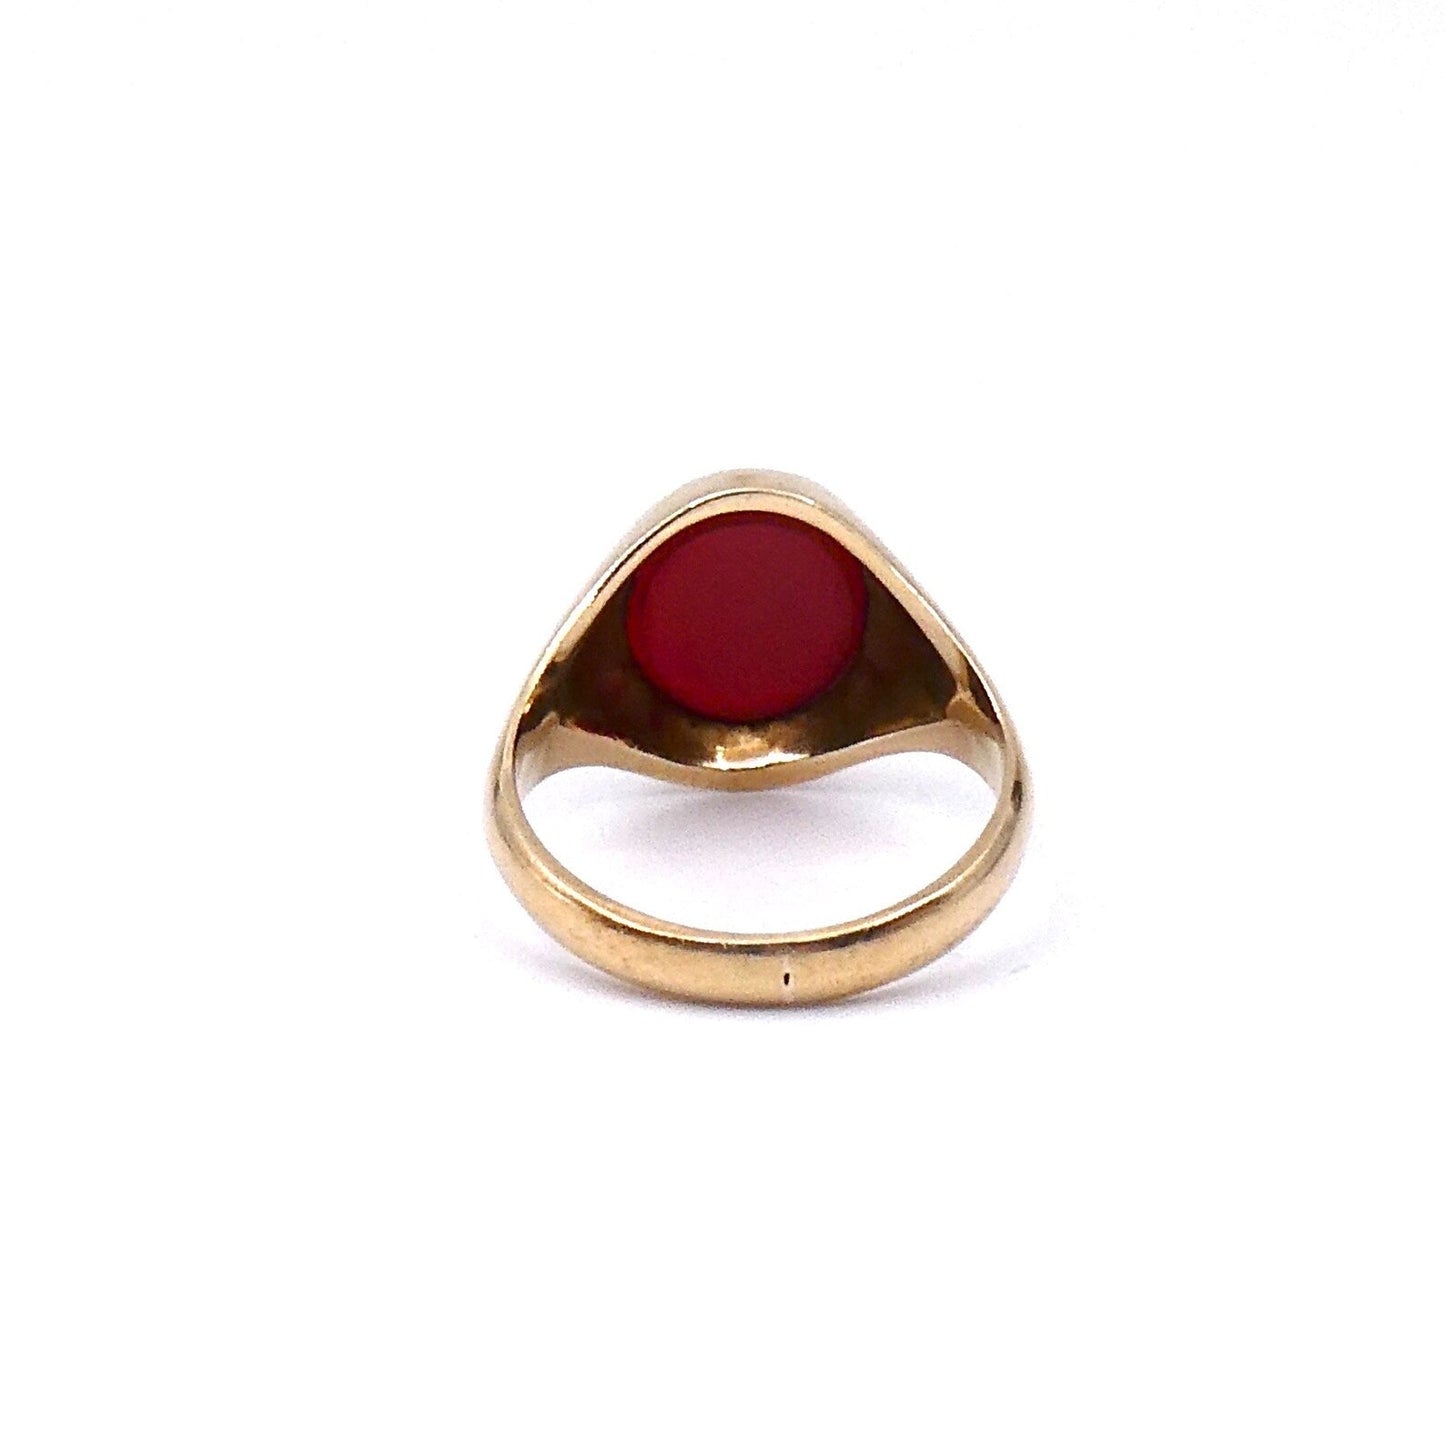 Vintage carnelian signet ring, set in 9kt gold with full hallmarks from London 1967. - Collected